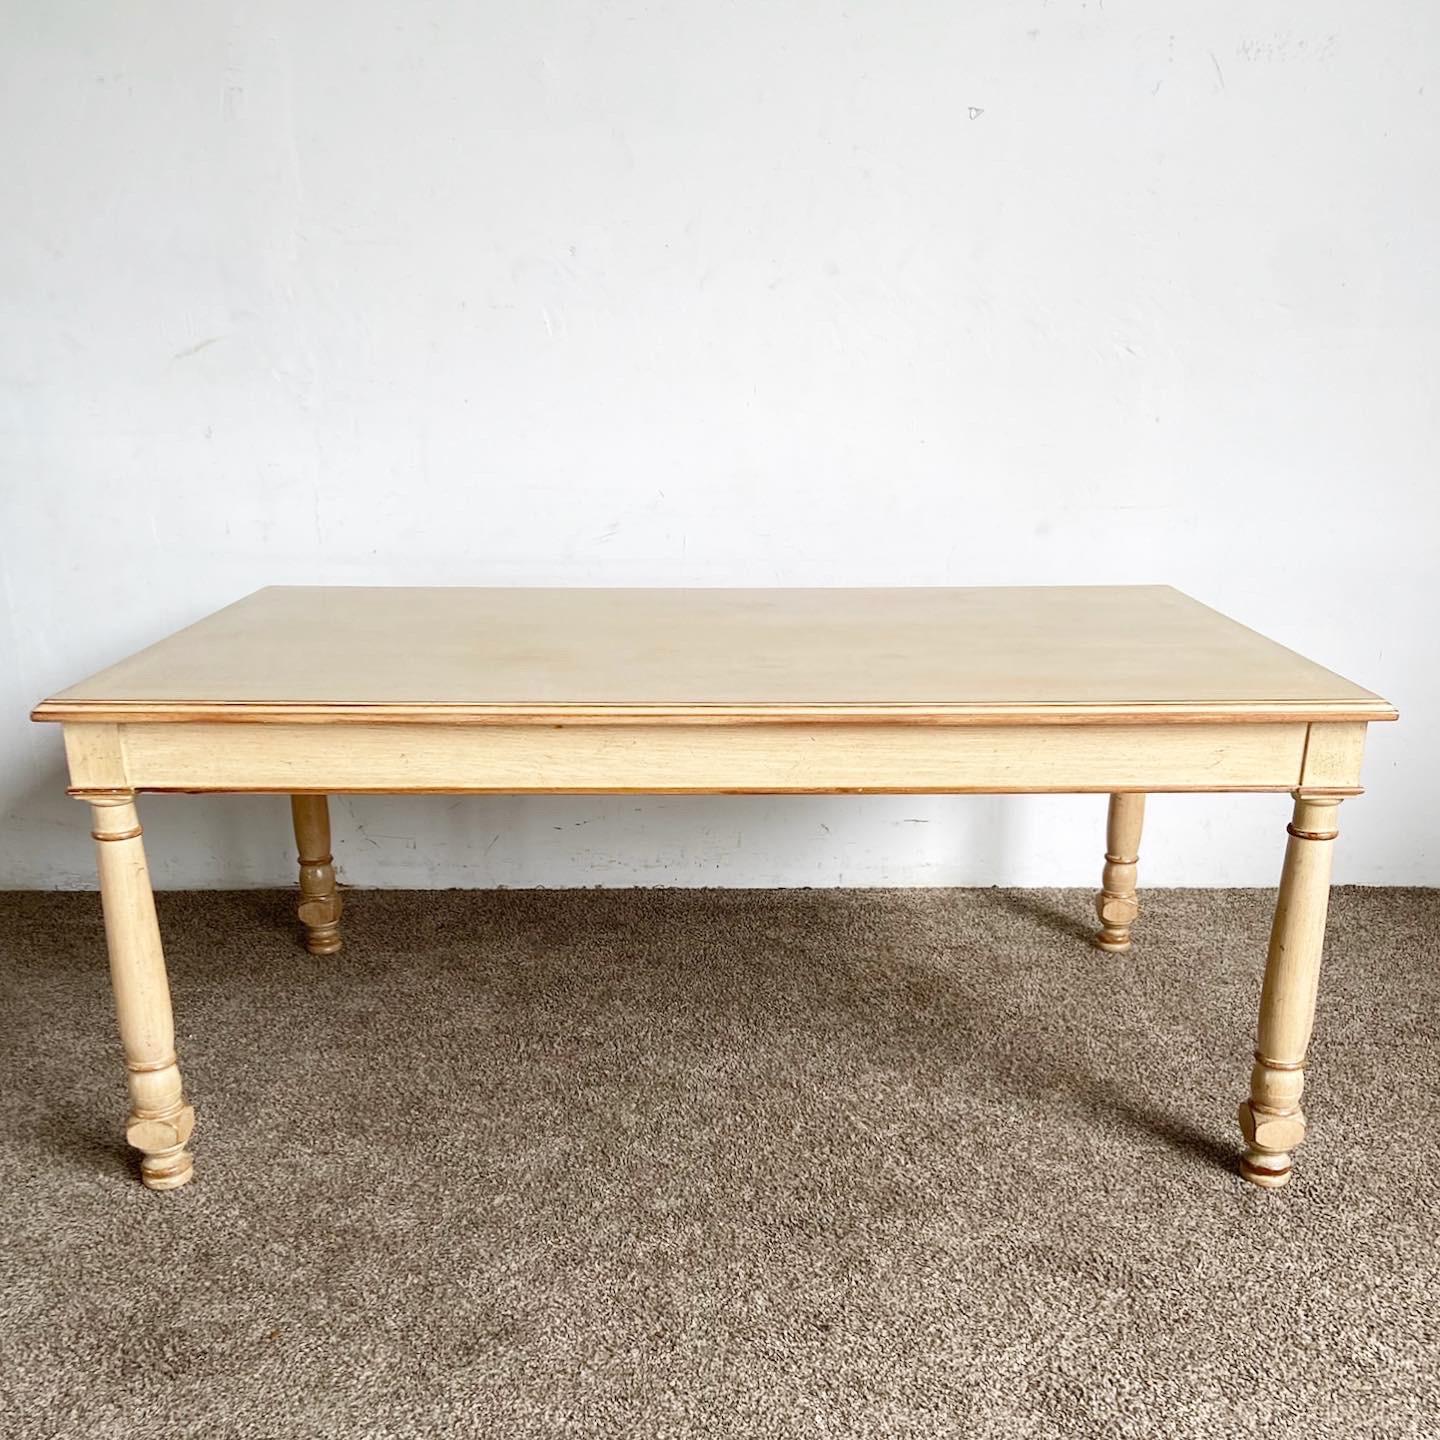 Our Vintage Regency White Wash Wooden Dining Table combines rustic charm with Regency elegance, perfect for any dining setting.

Features a white-washed finish with distressed accents, showcasing the wood's natural beauty.
Large enough for